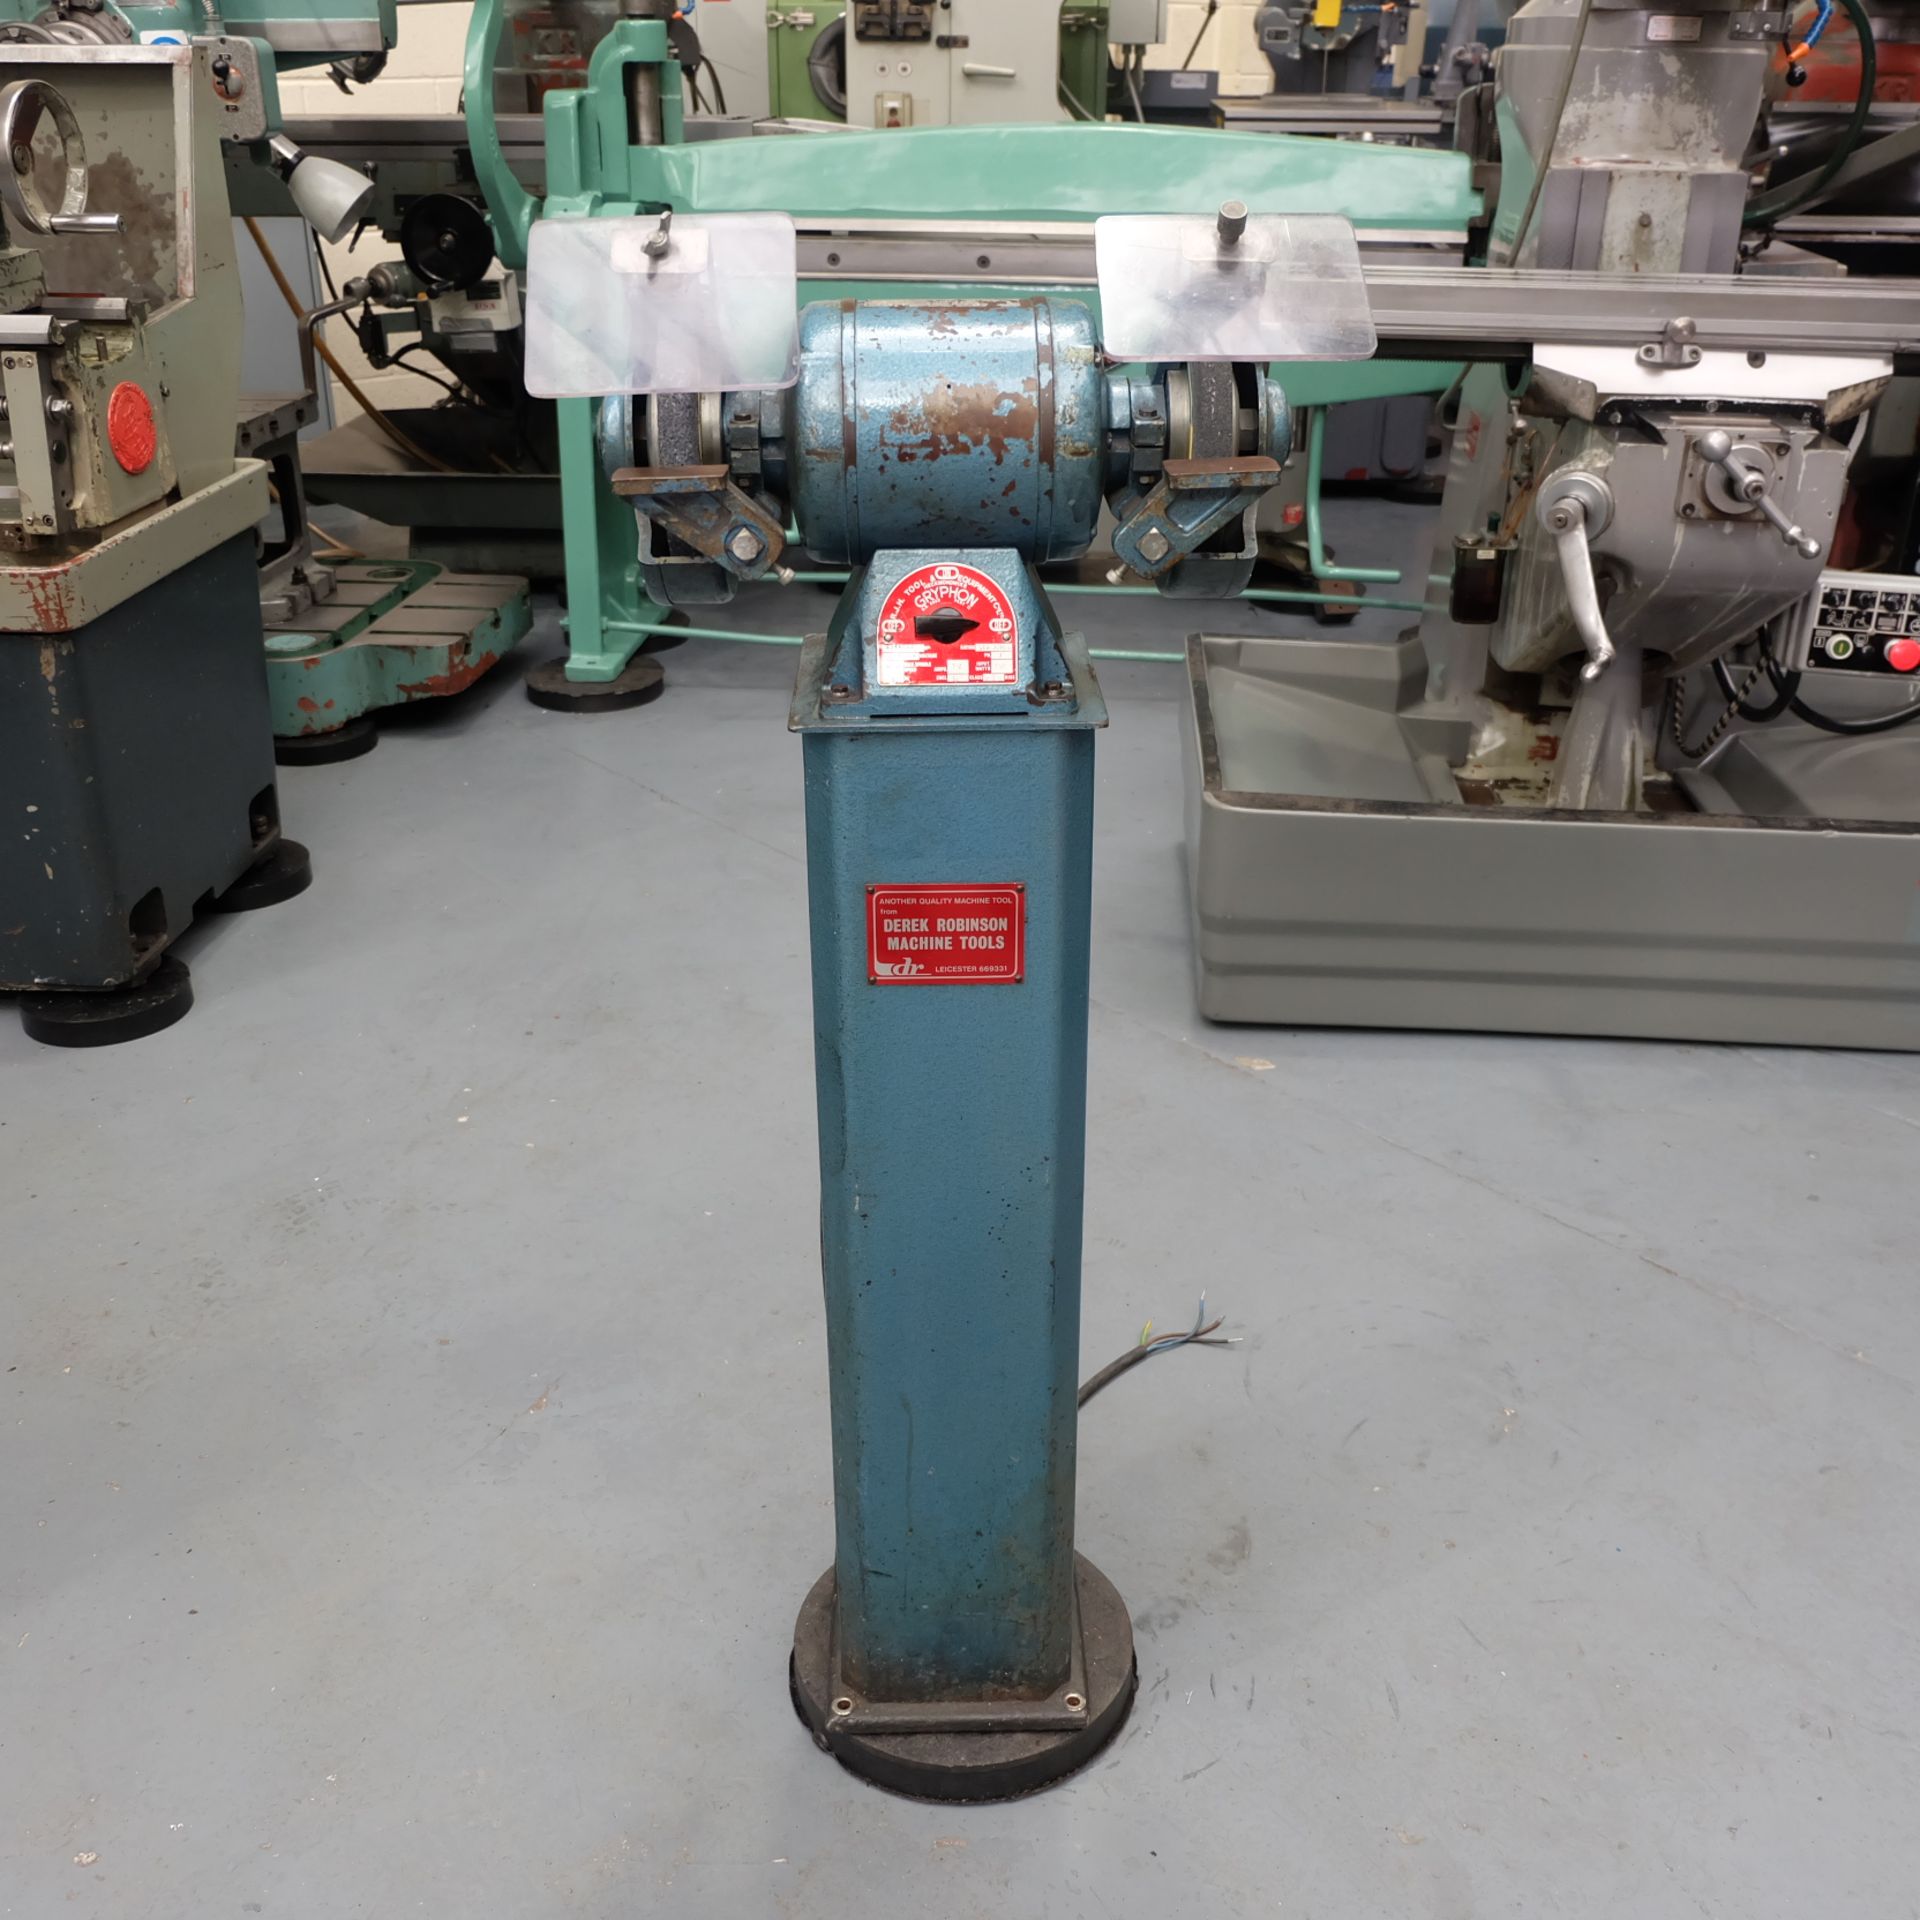 RJH Gryphon: Double Ended Tool Grinder. Wheel Size 6" x 1/2".